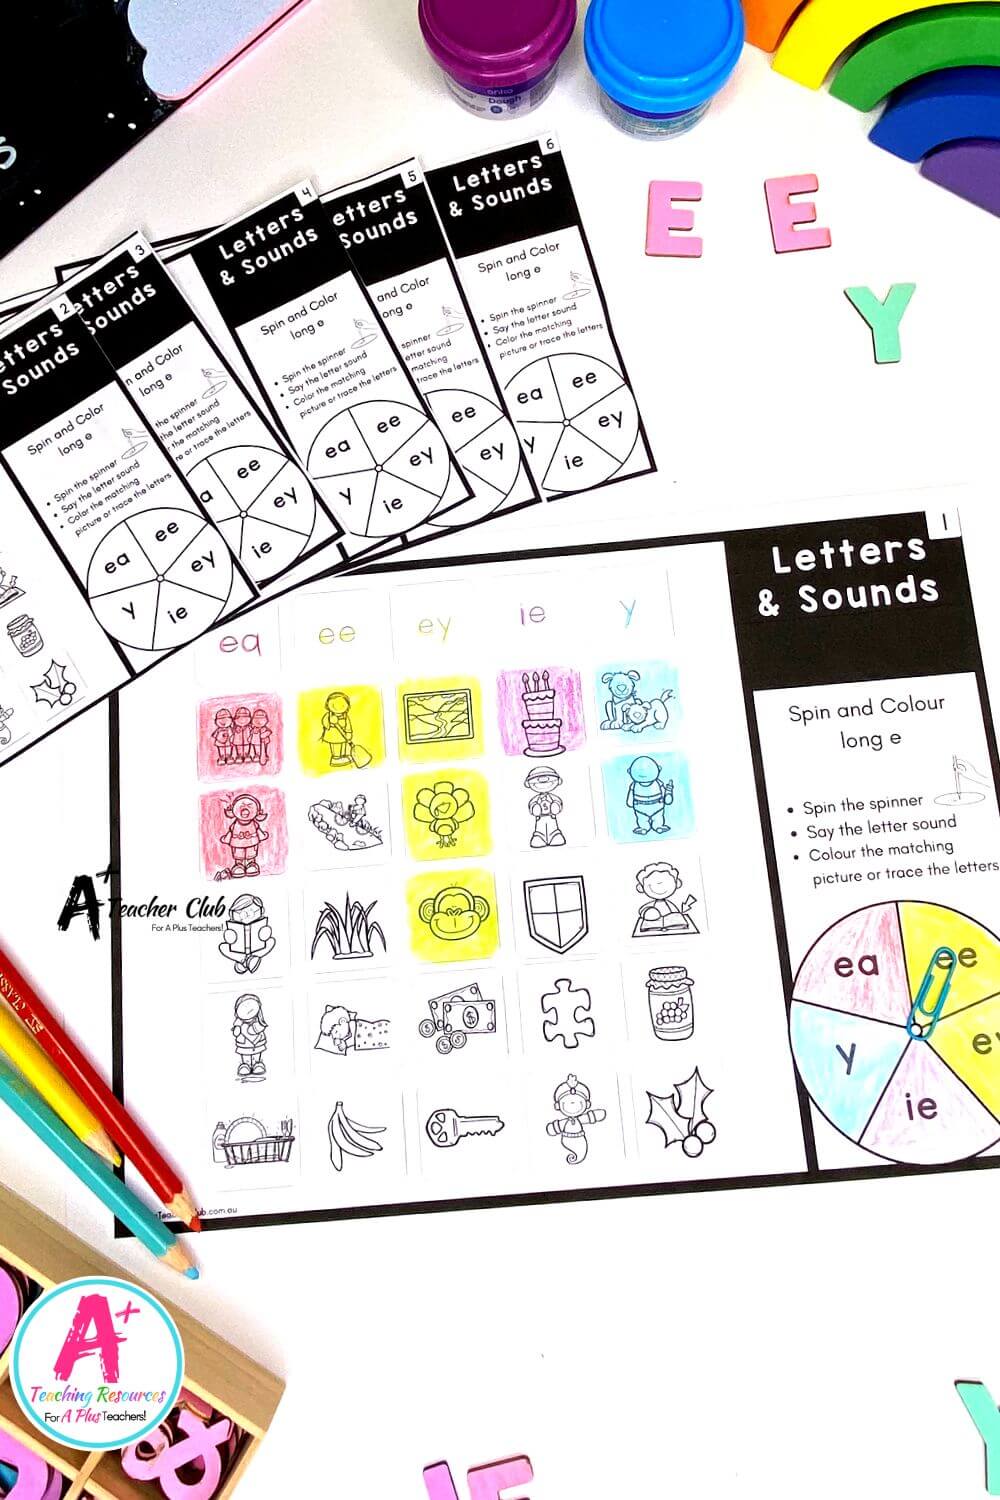 Long e Spin & Colour Worksheets (B&W)